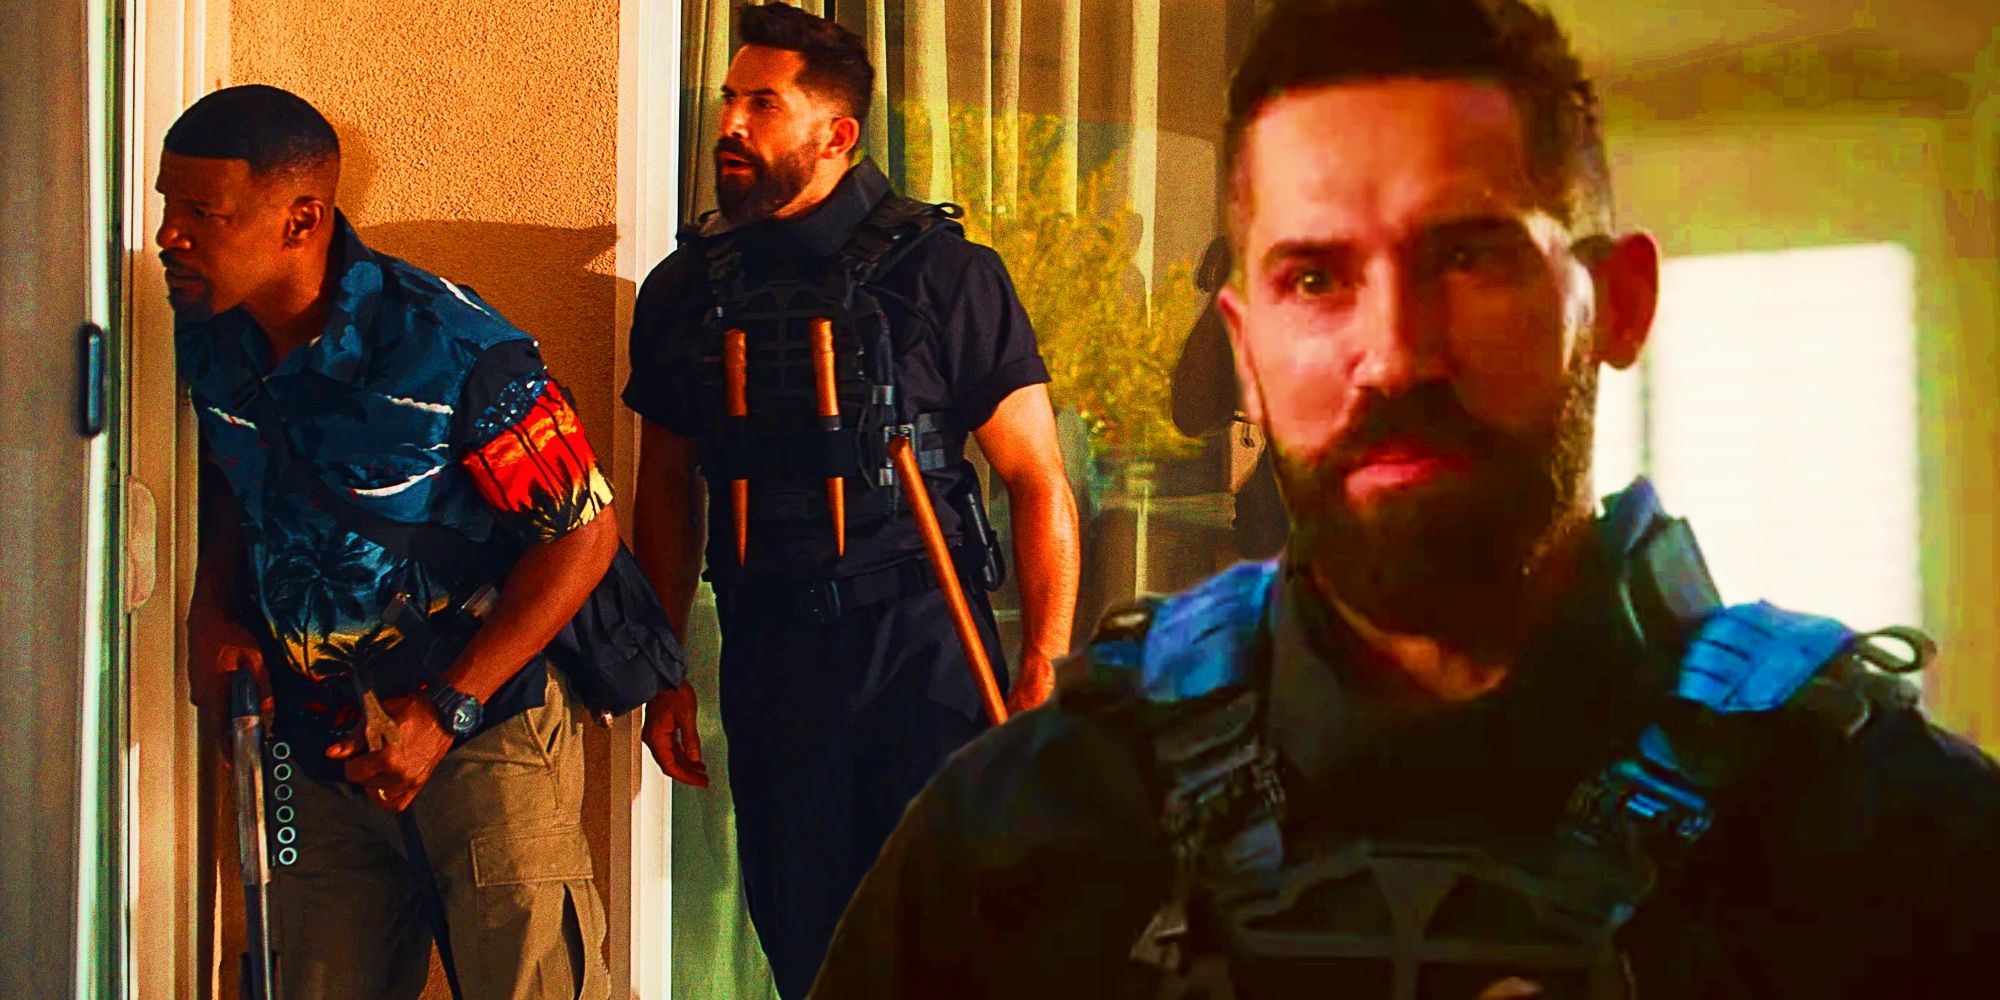 scott adkins as the nazarian brother in day shift standing next to jamie foxx's bud